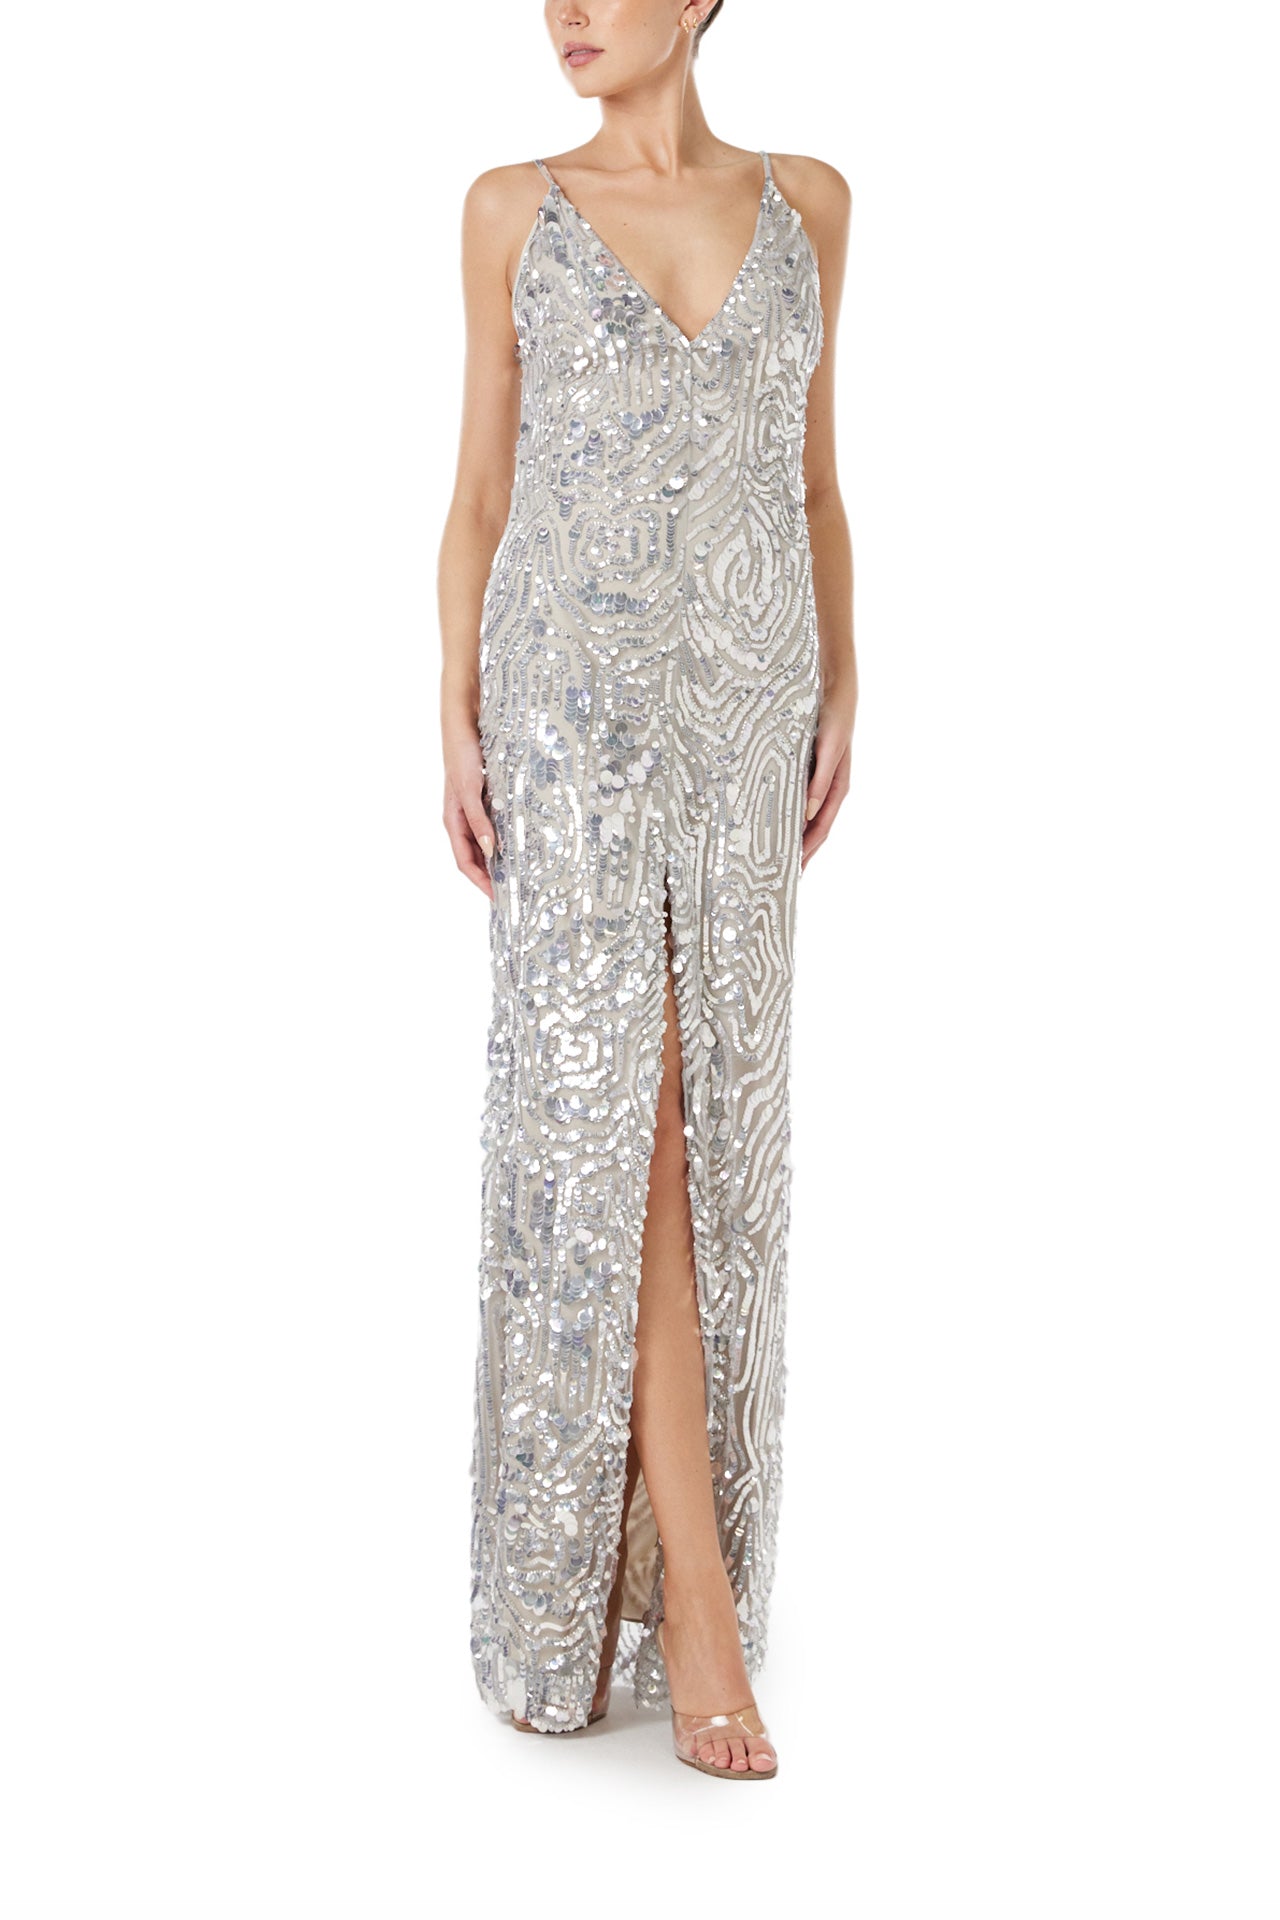 Monique Lhuillier Spring 2024 silver sequin slip gown with deep v neckline and high front slit - front 2.